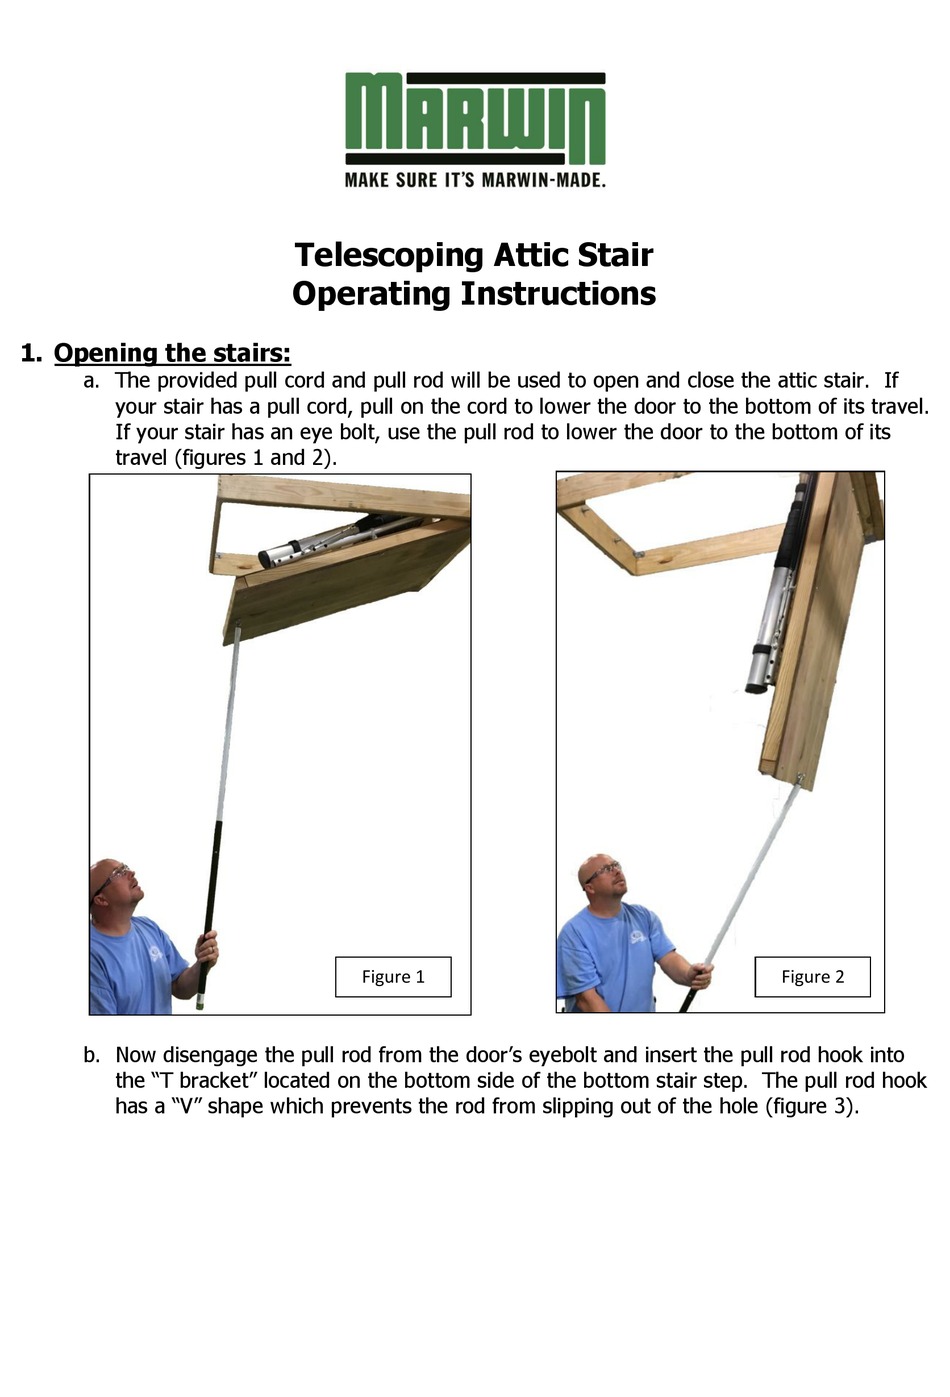 MARWIN TELESCOPING ATTIC STAIR OPERATING INSTRUCTIONS MANUAL Pdf Download